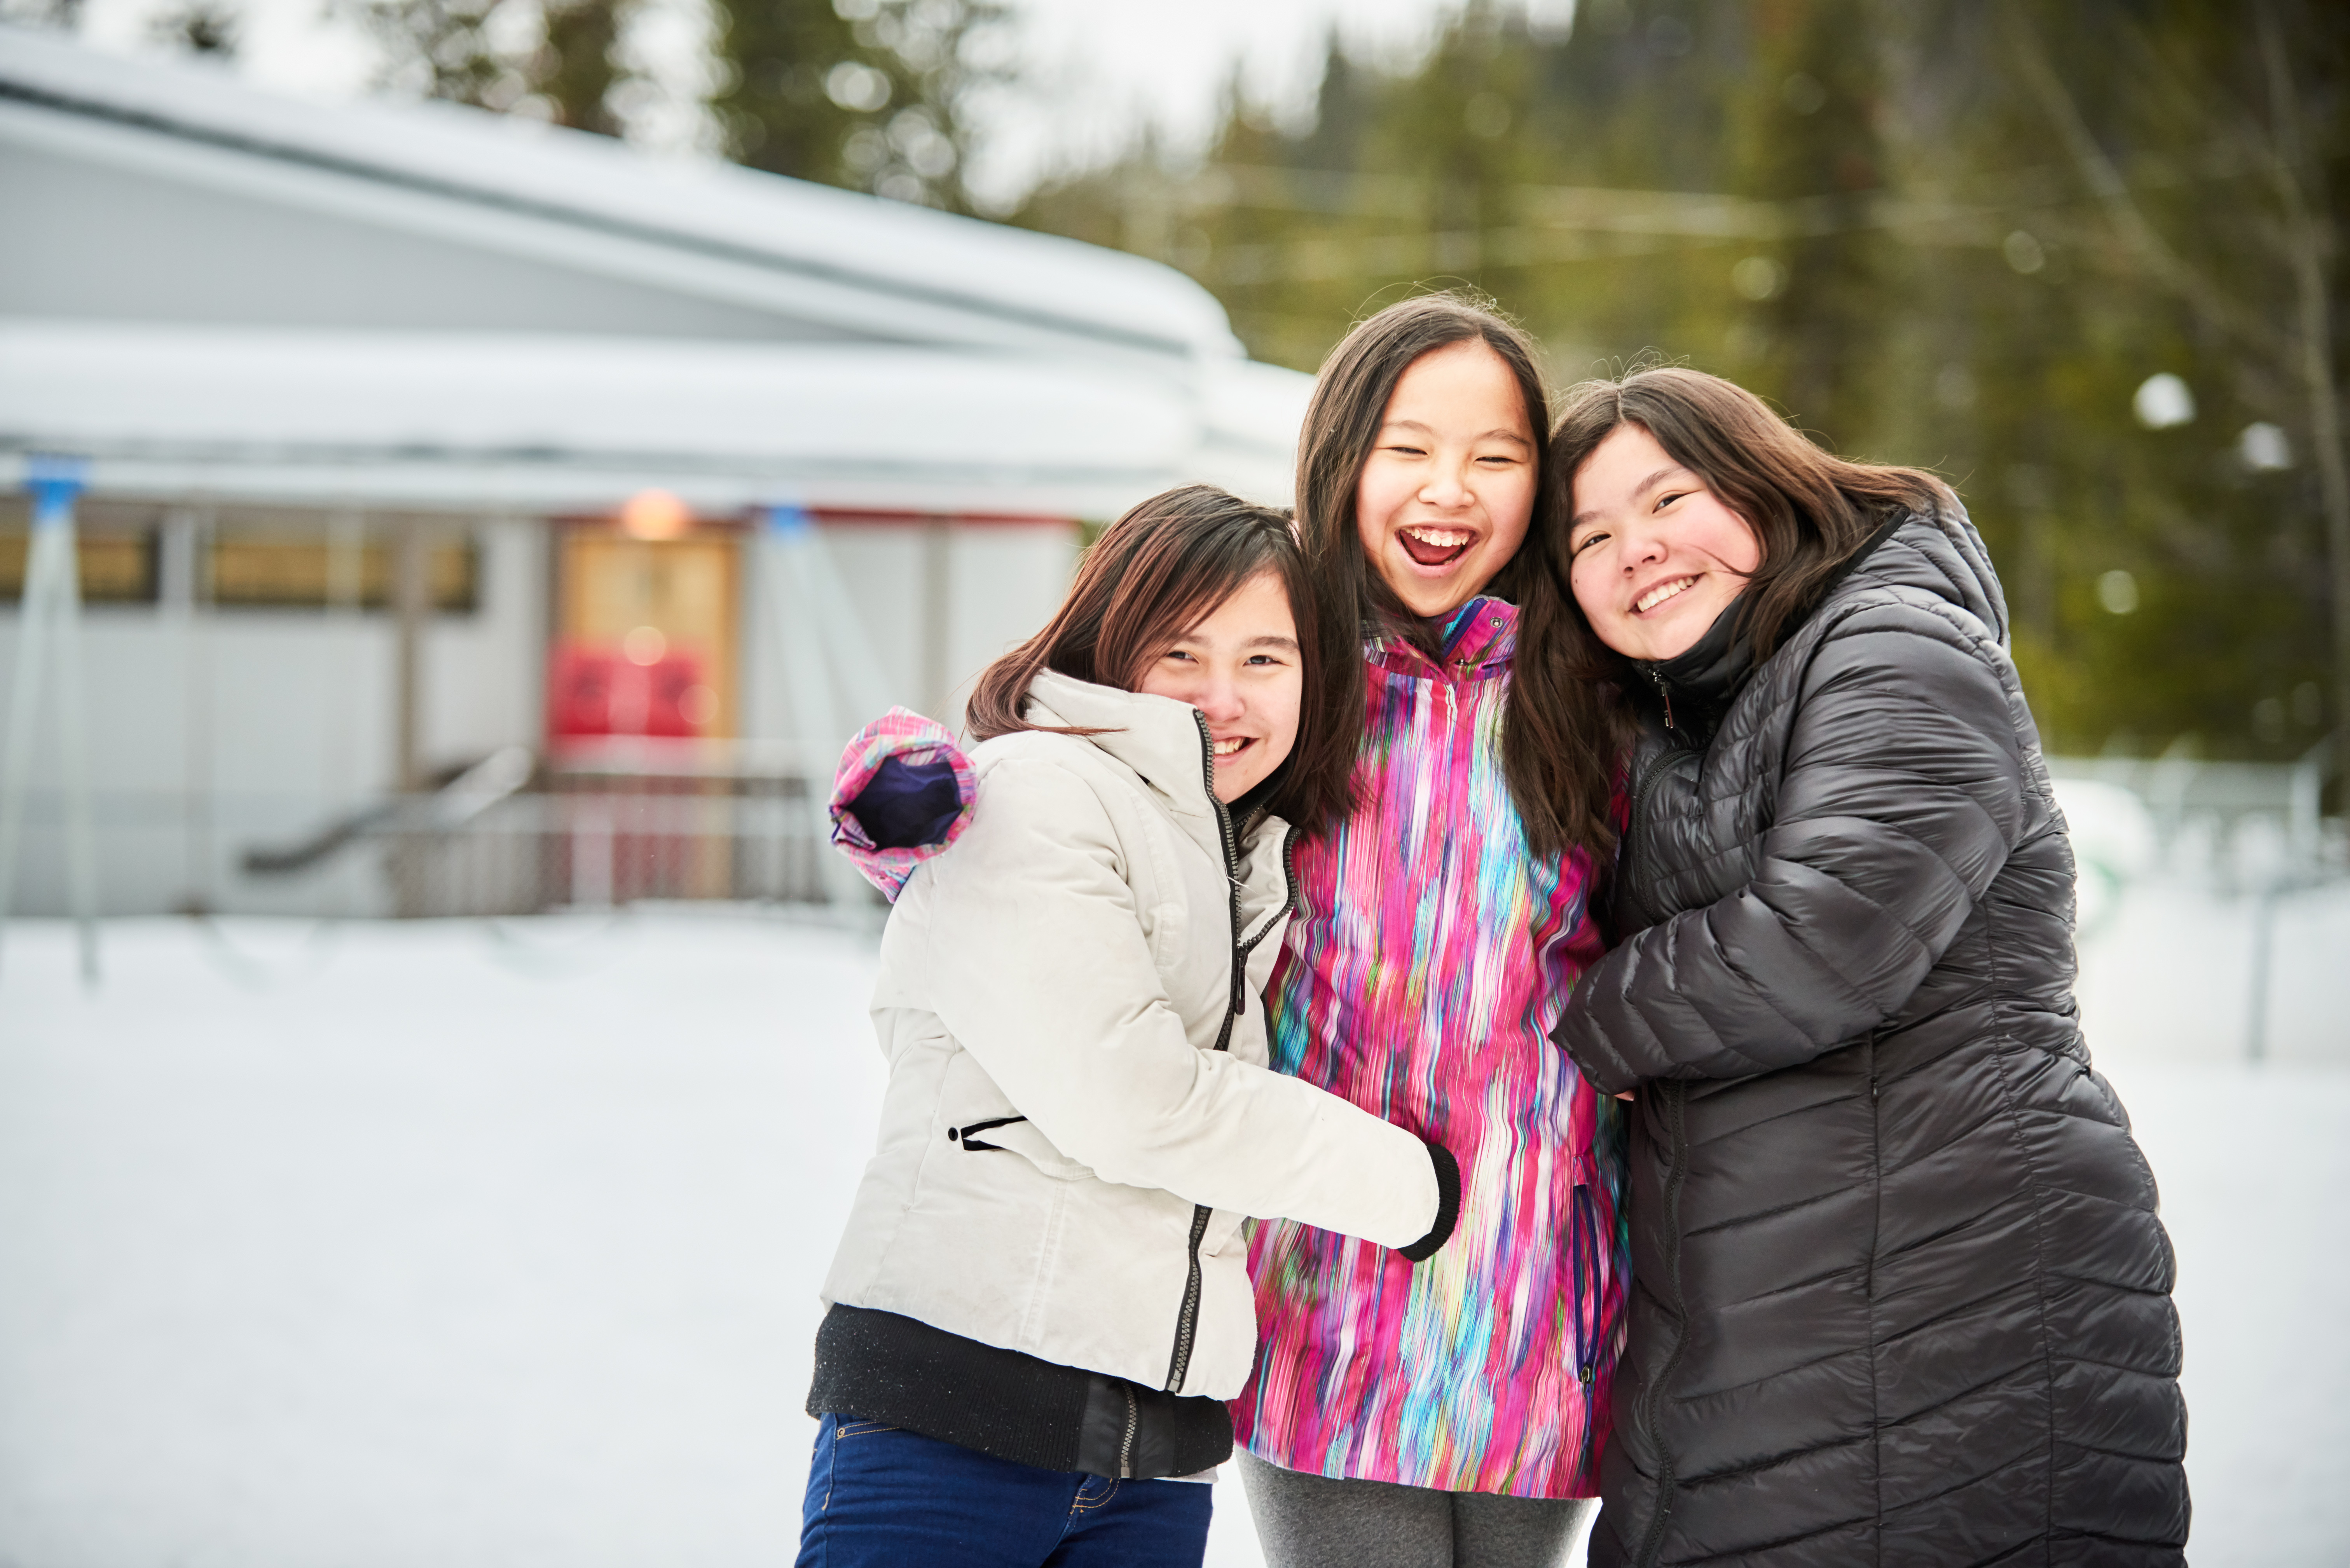 3 indigenous girls hugging and smiling while standing in the snow